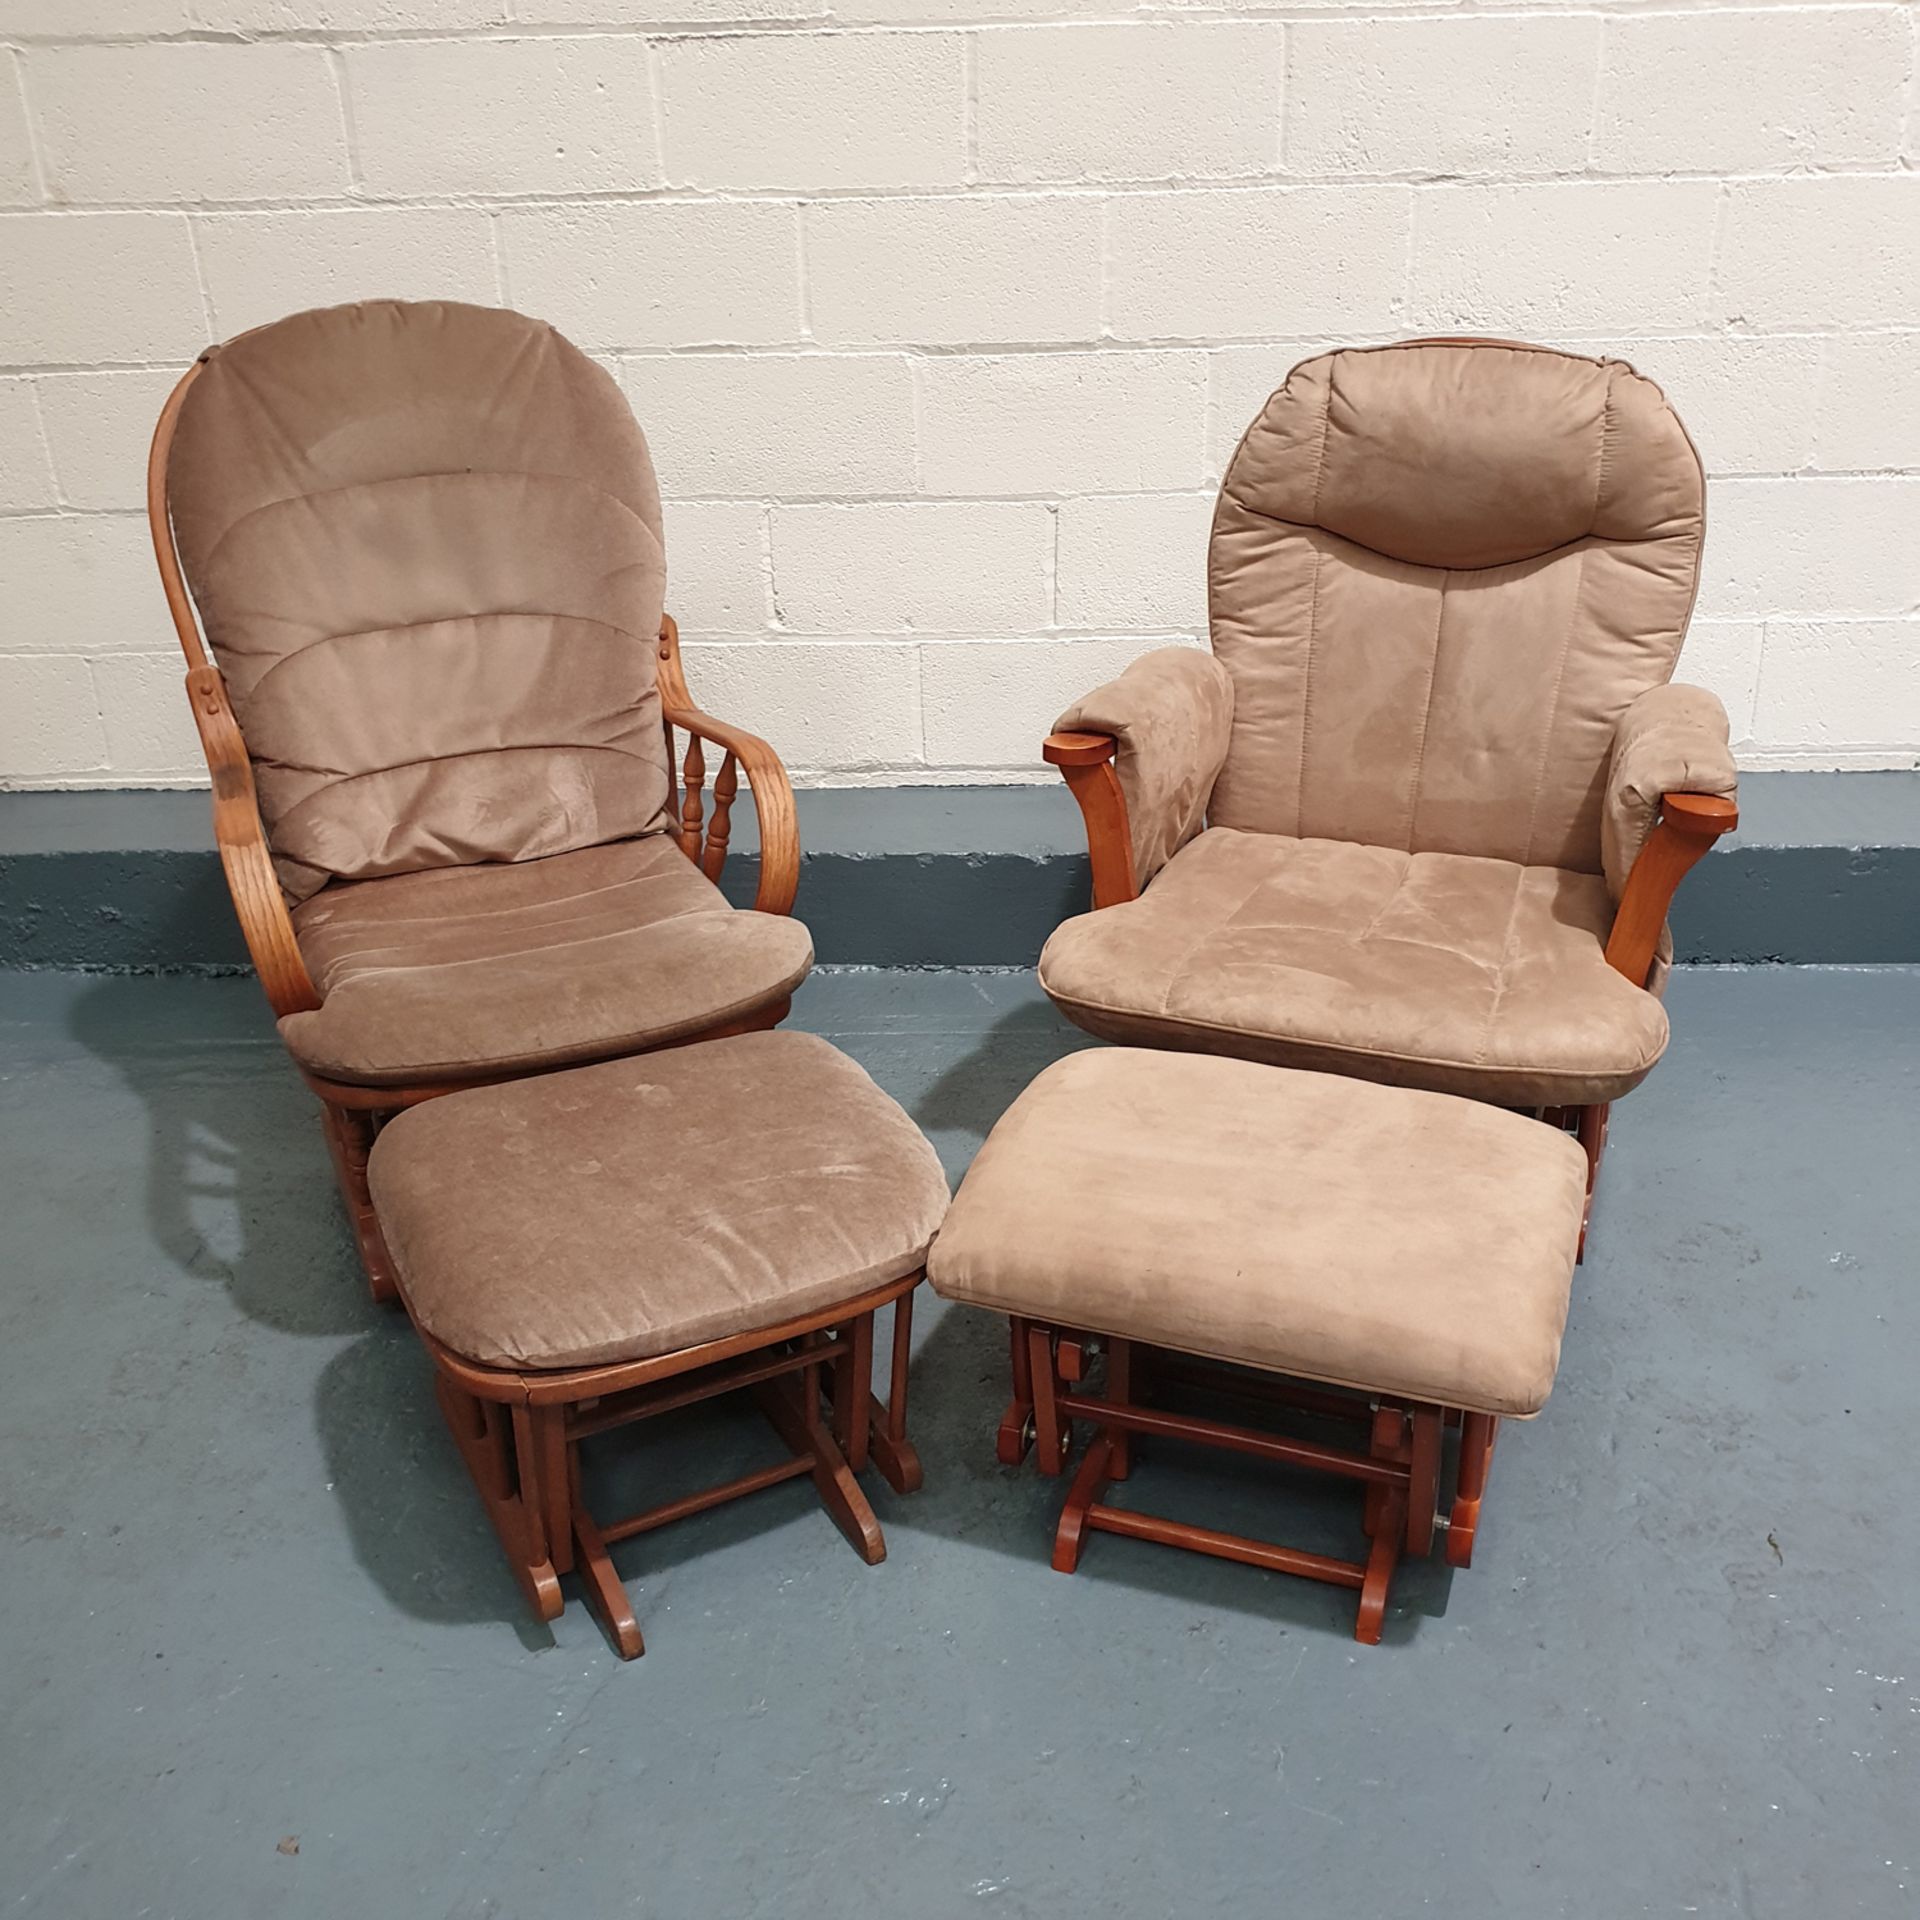 2 x Rocking Chairs with Matching Rocking Foot Rests.